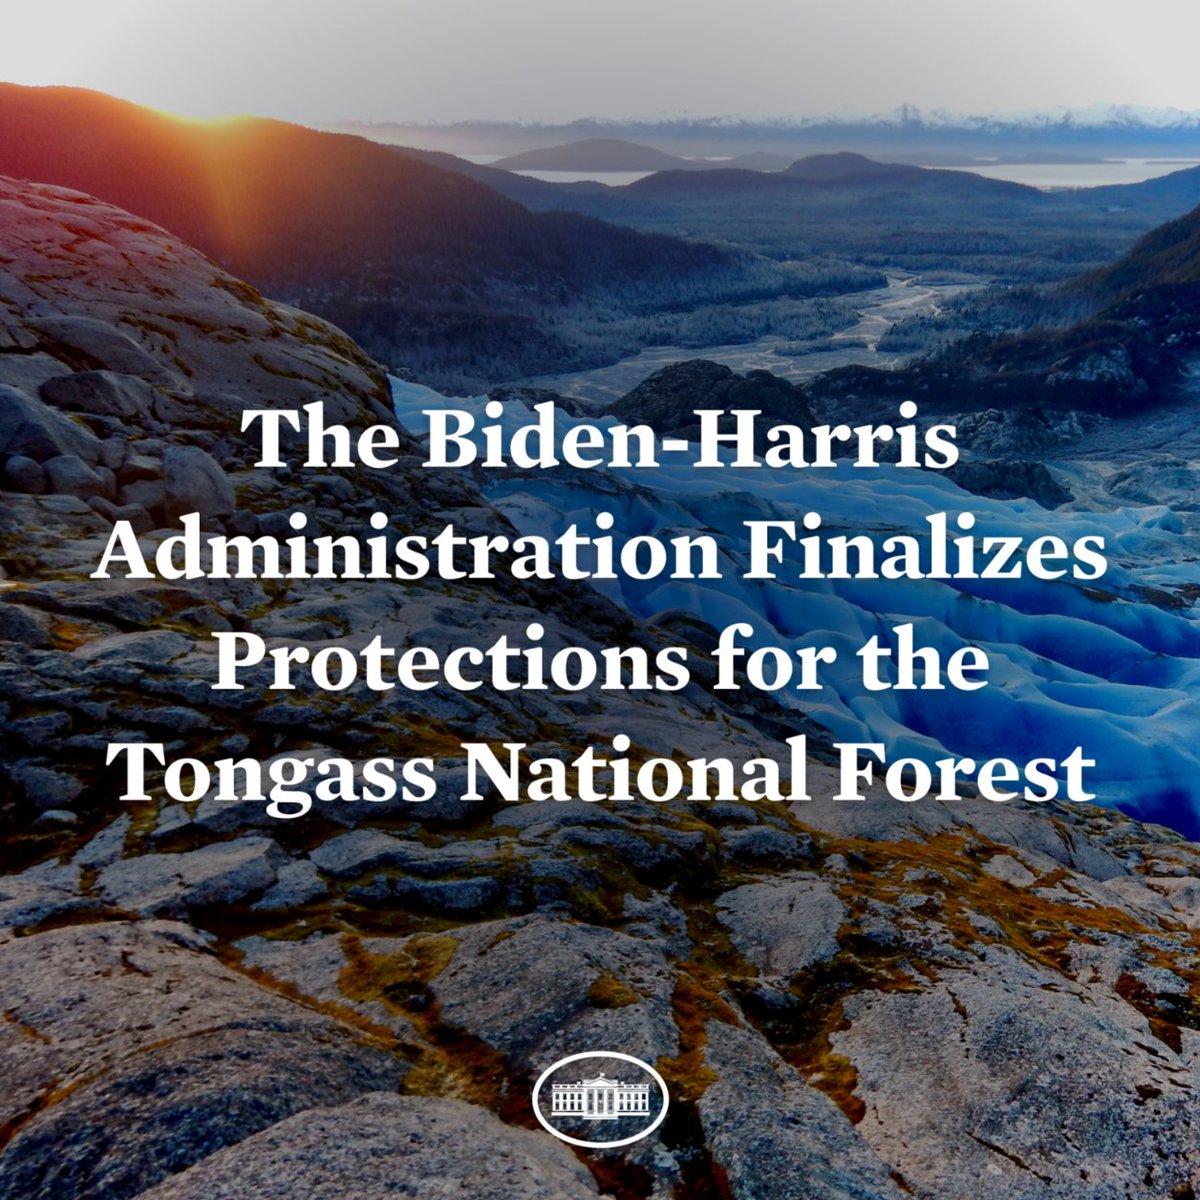 America's forests are a natural solution to the climate crisis. Today, @USDA finalized protections for the Tongass, the largest intact temperate rainforest in the world. We're committed to conserving and restoring our cherished lands, many of which are sacred to Tribal Nations.